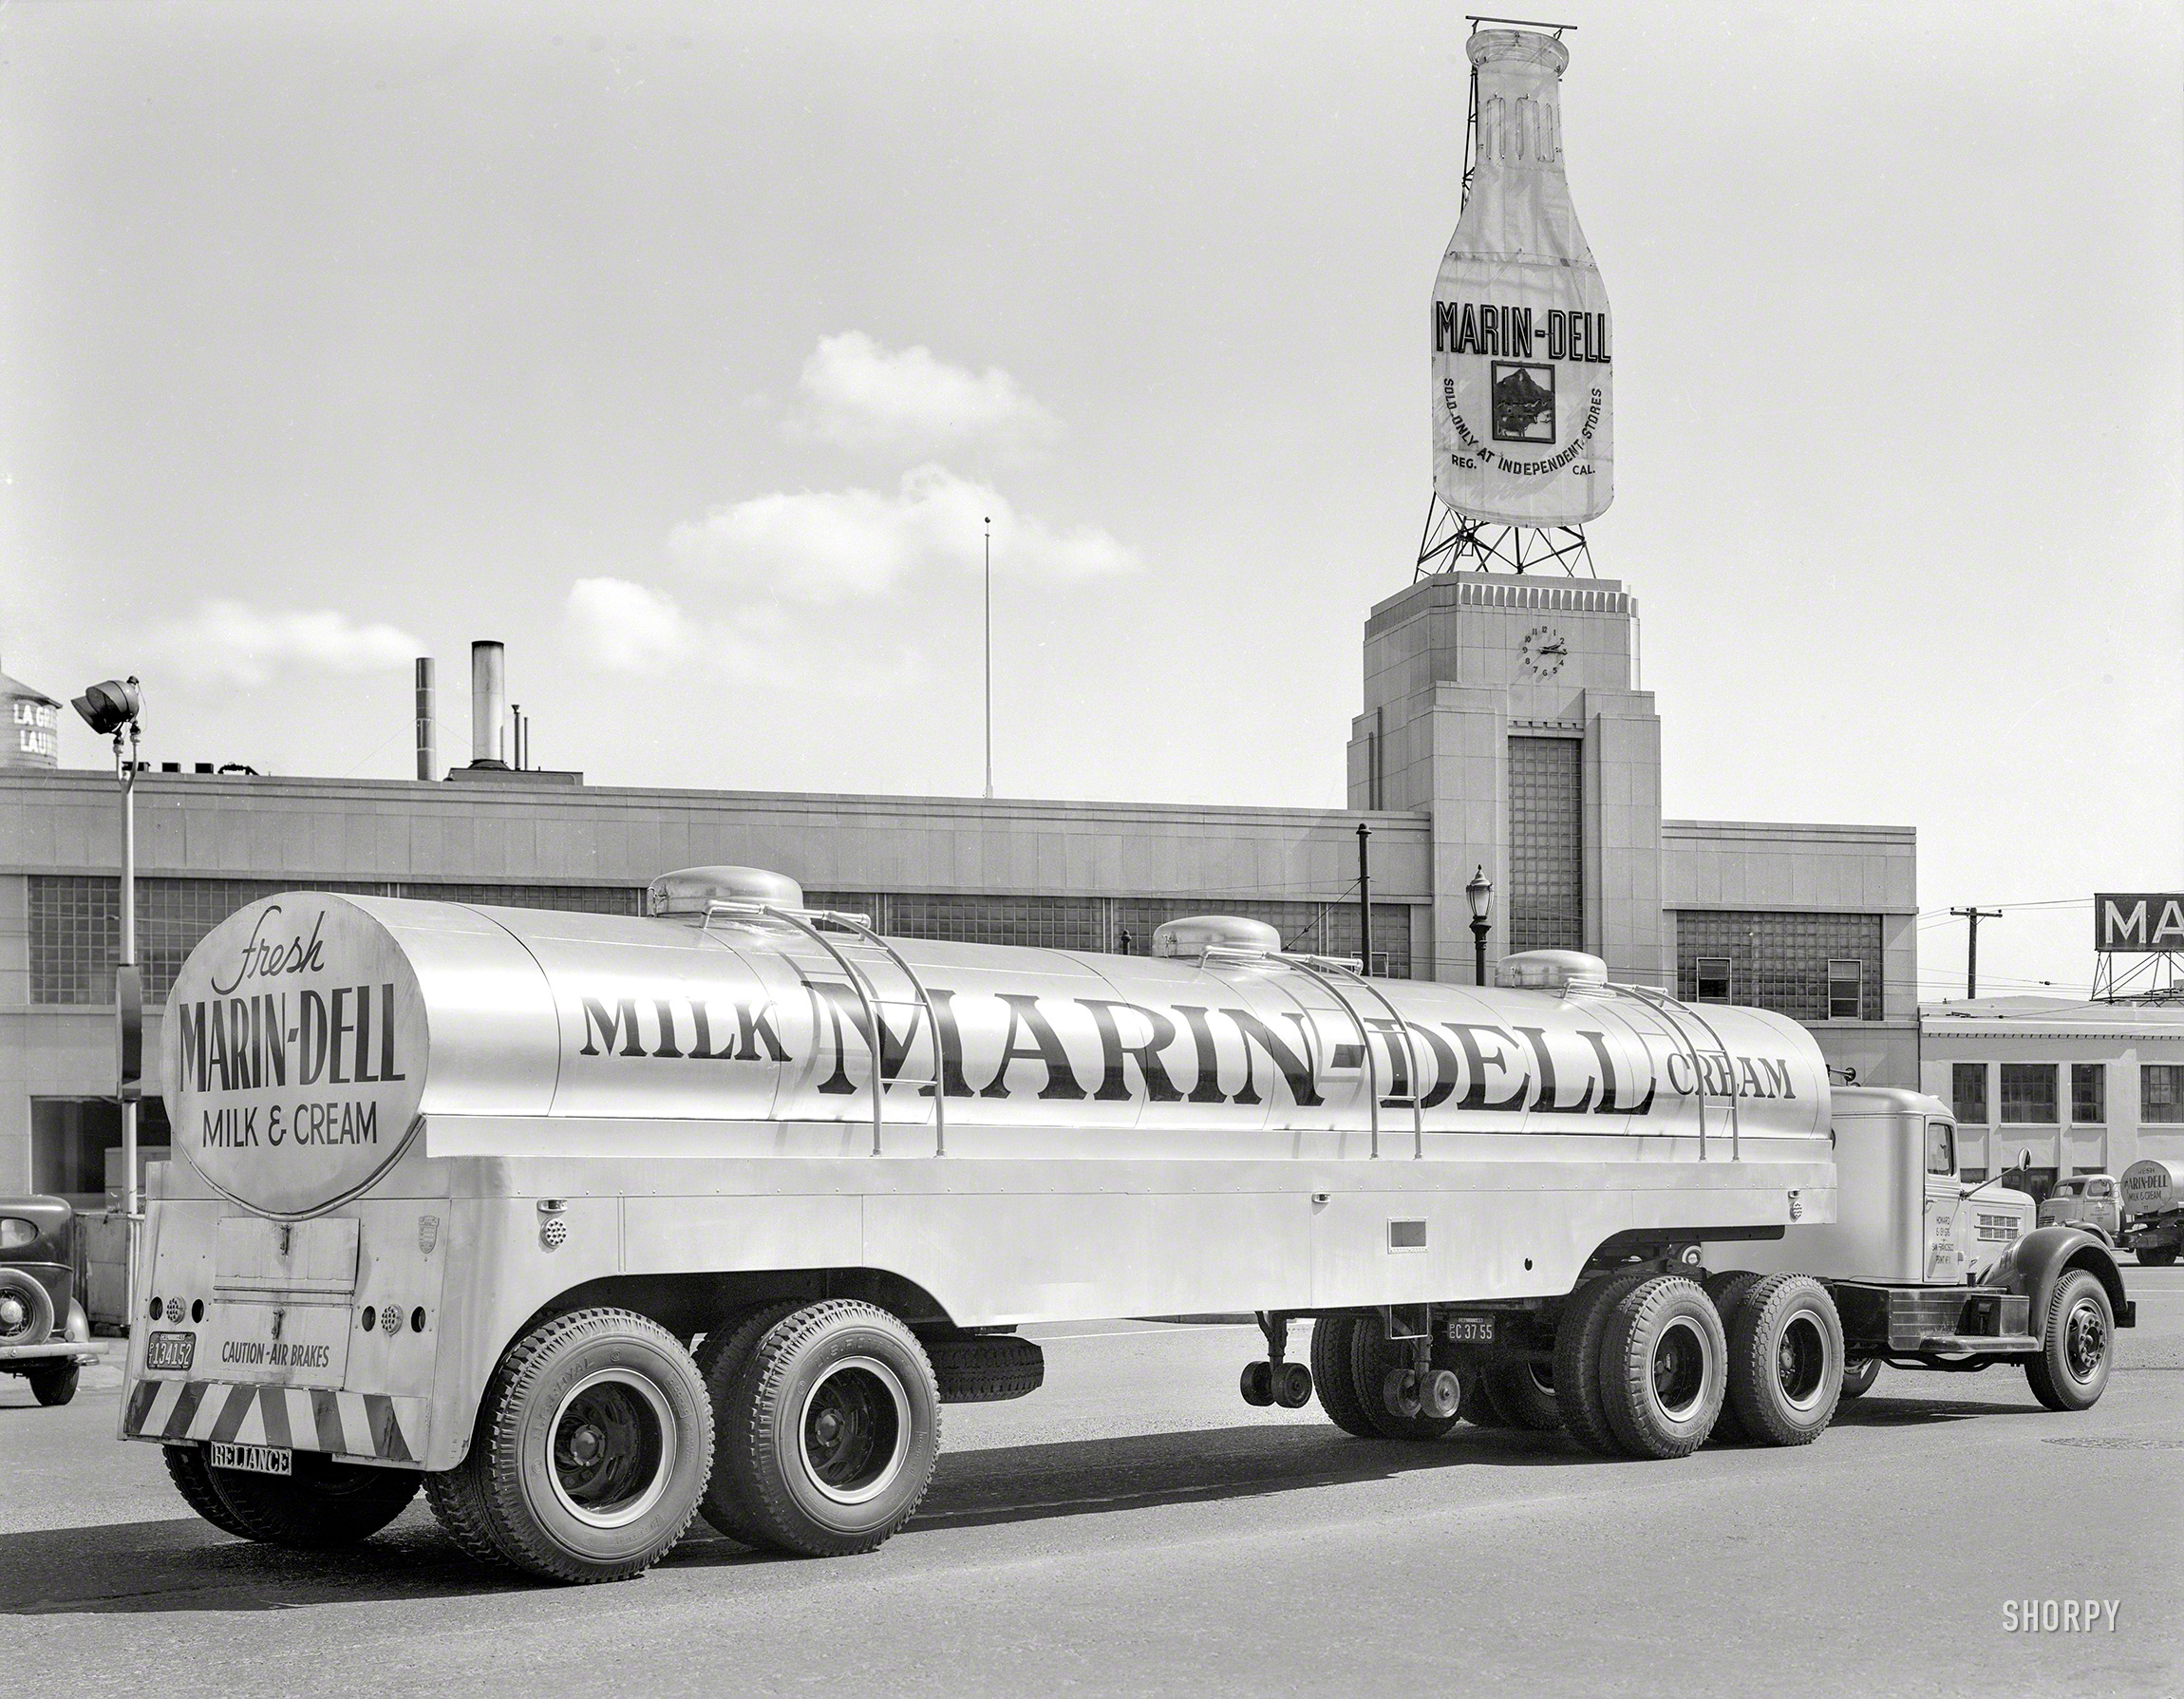 March 9, 1945. "Marin-Dell dairy truck, San Francisco." Truck experts please weigh in on the particulars of this rig. 8x10 inch nitrate negative. View full size.